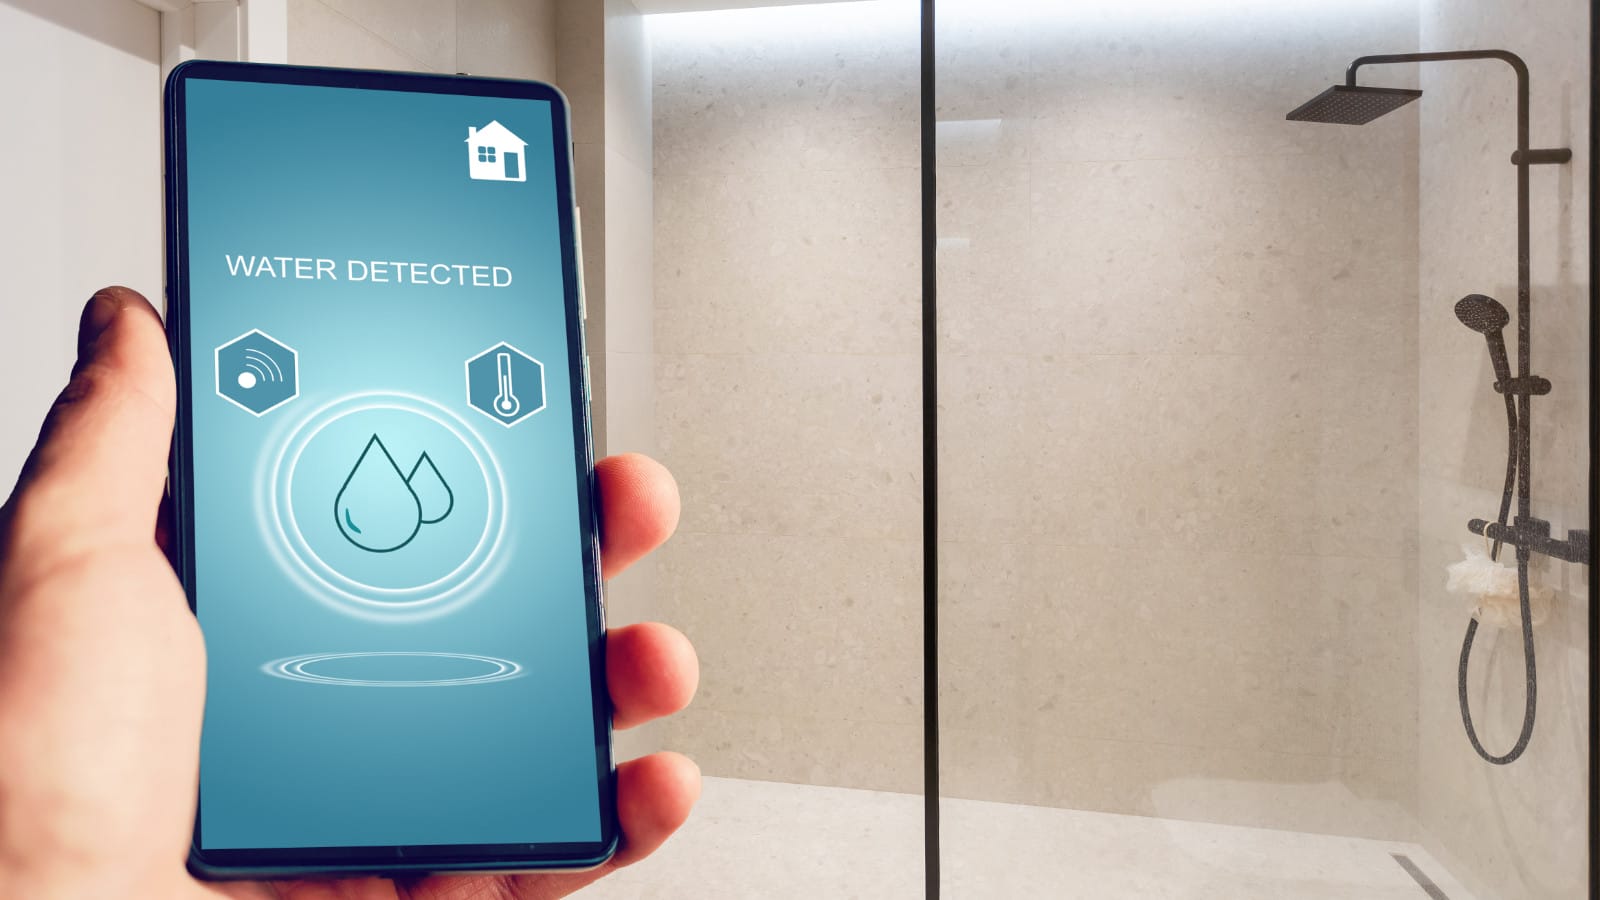 Hand holding a smartphone with a 'Water Detected' alert on the screen, indicating smart home technology integration in a modern bathroom setting.